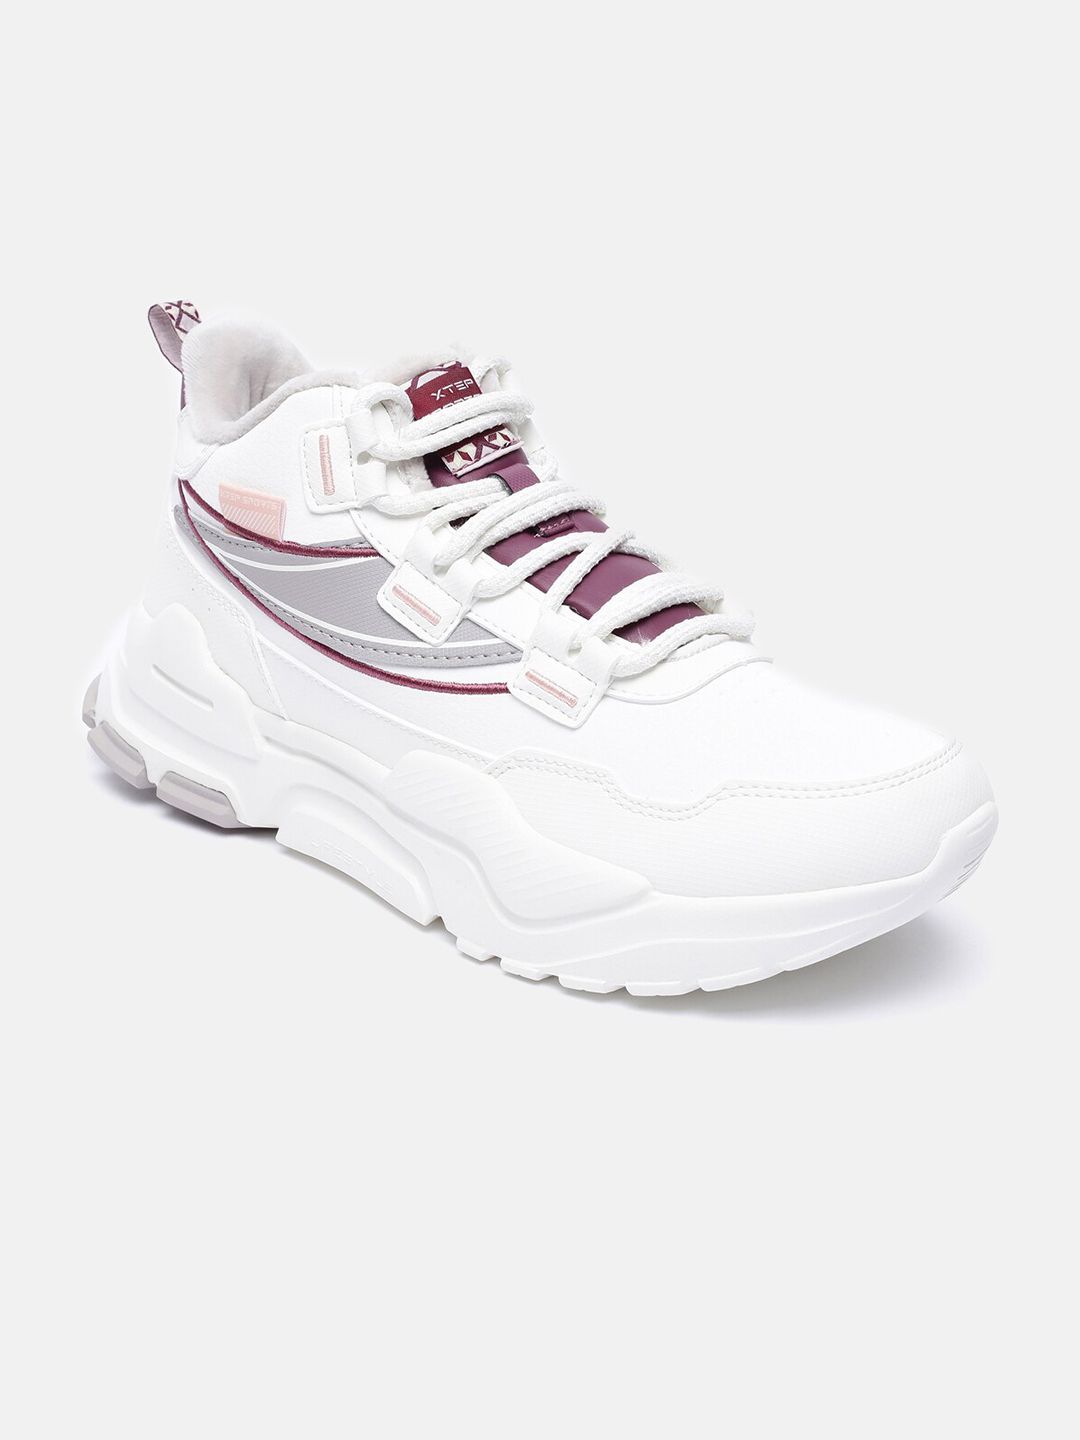 Xtep Women White Training or Gym Non-Marking Shoes Price in India